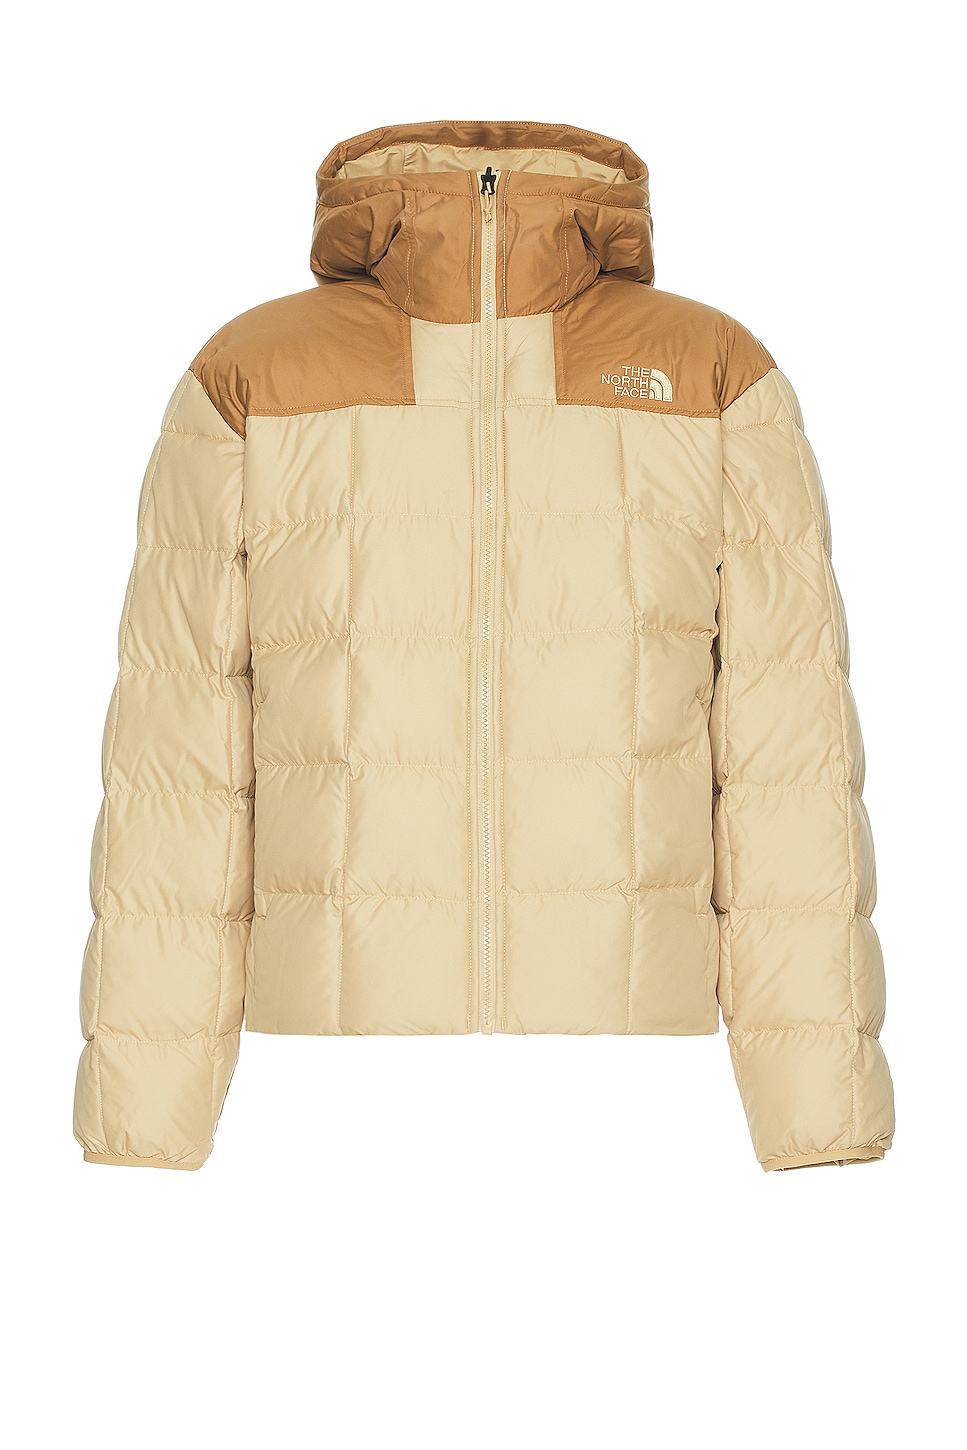 Image 1 of The North Face Lhotse Reversible Hoodie in Khaki Stone & Utility Brown